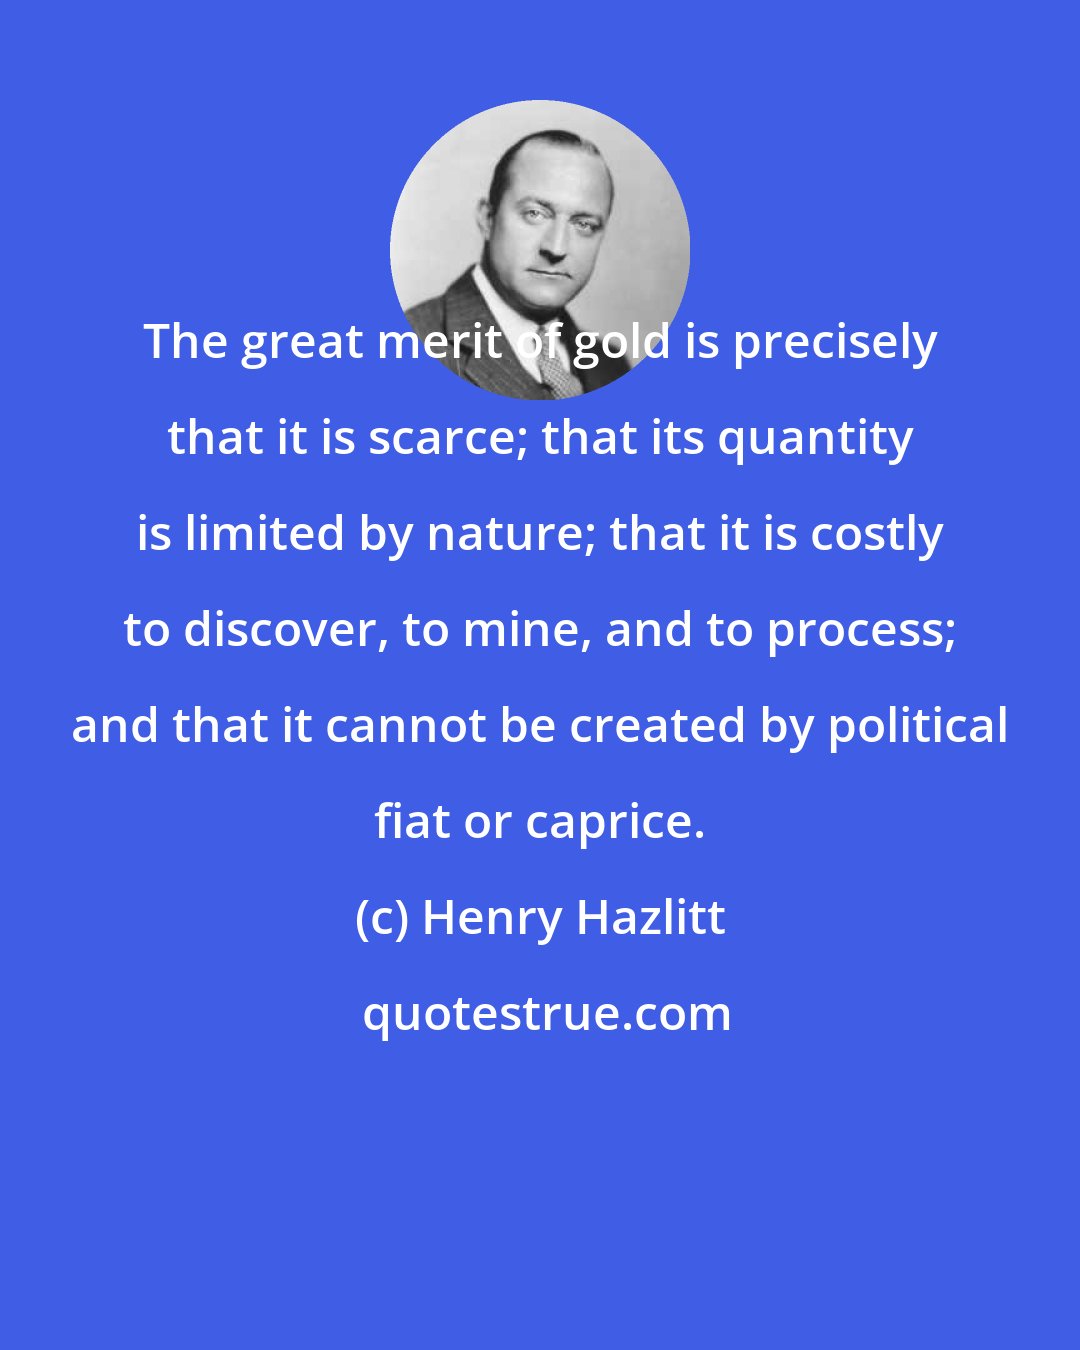 Henry Hazlitt: The great merit of gold is precisely that it is scarce; that its quantity is limited by nature; that it is costly to discover, to mine, and to process; and that it cannot be created by political fiat or caprice.